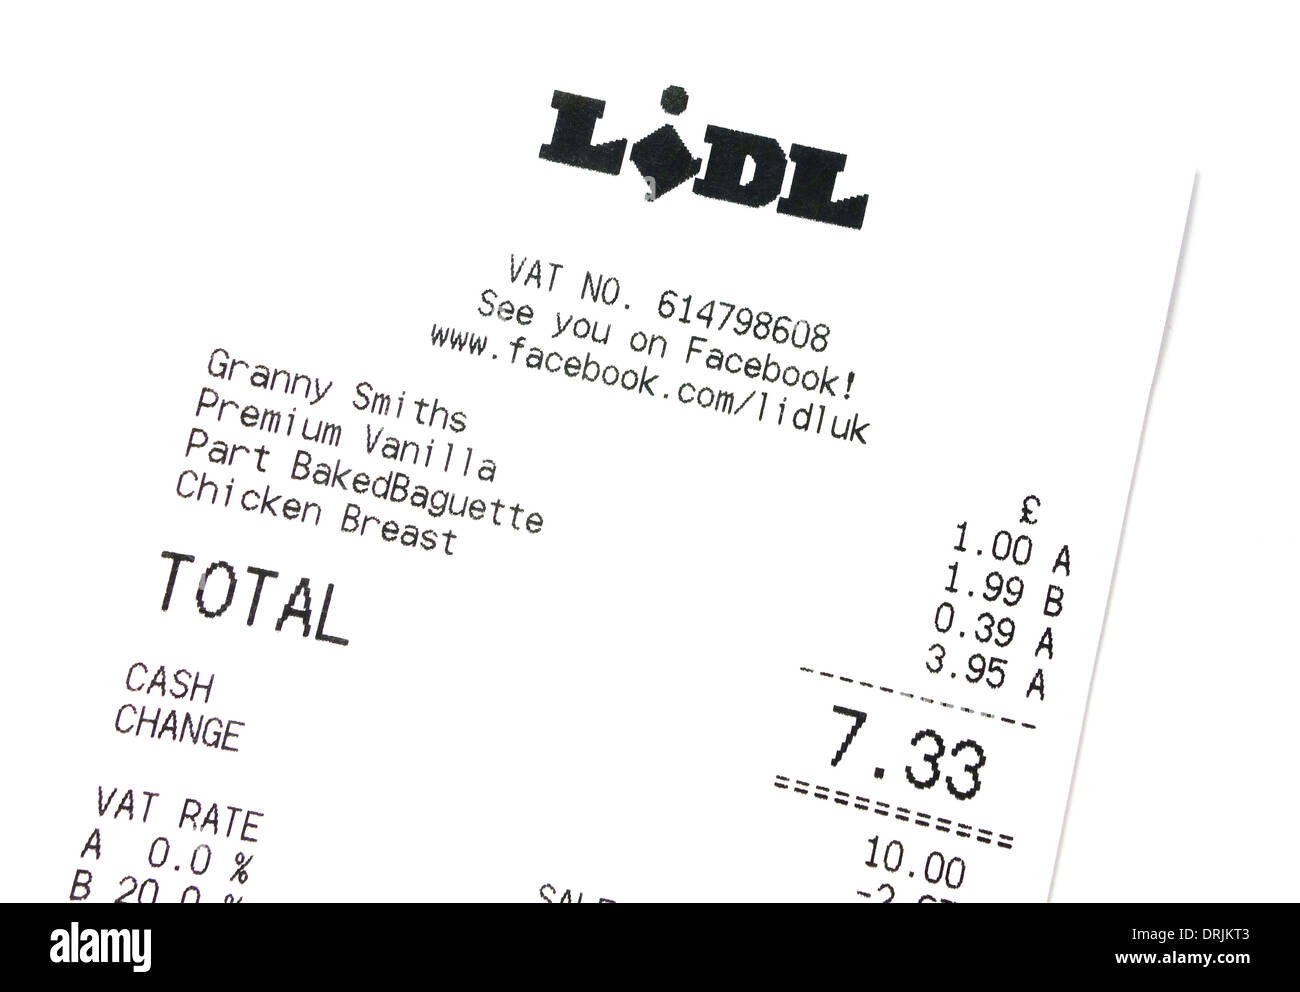 A Lidl store receipt Stock Photo